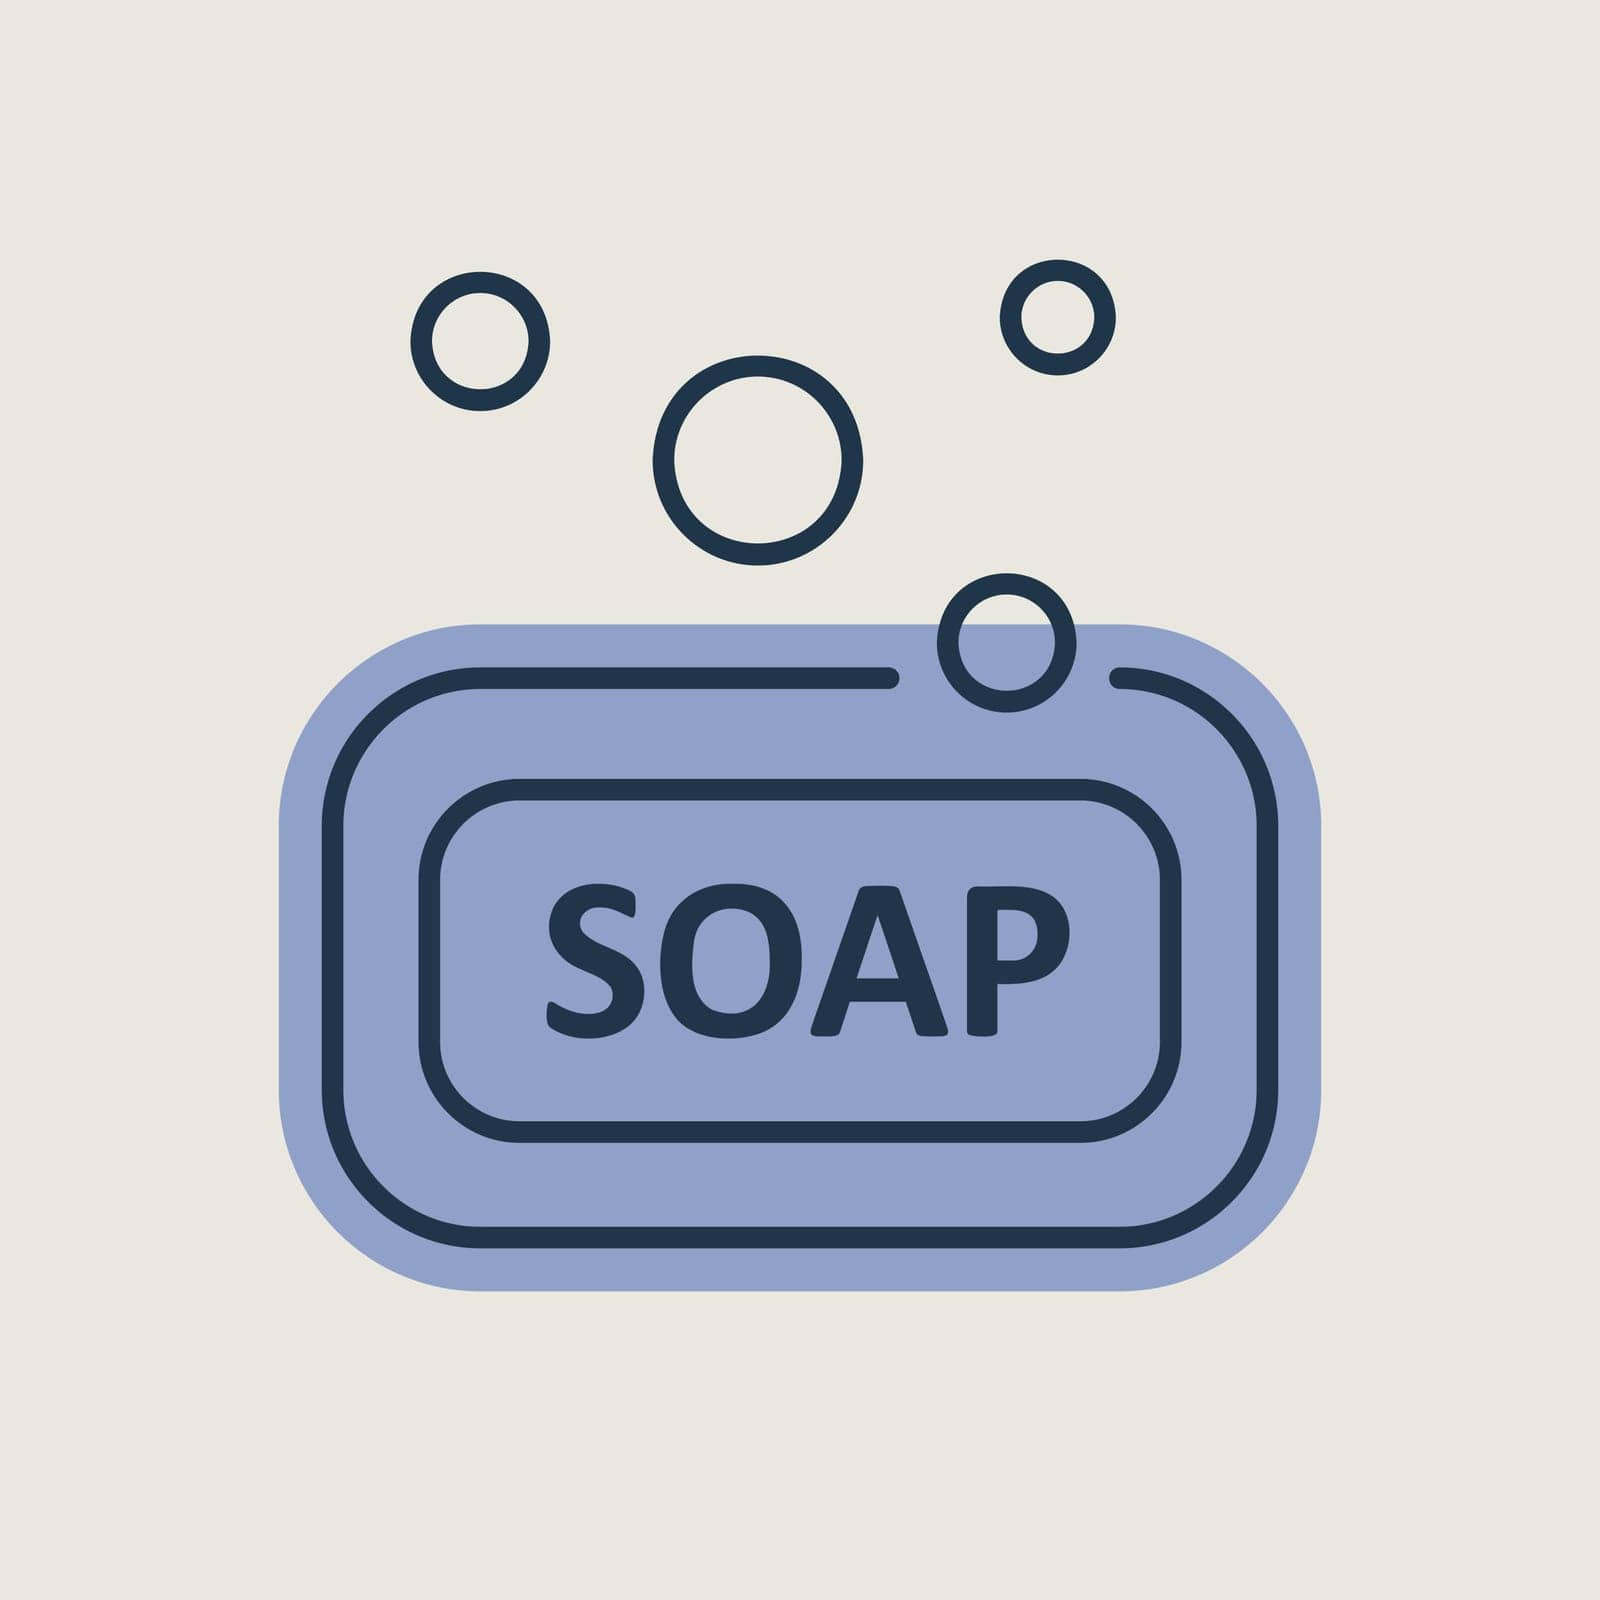 Soap vector icon. Hygiene sign by nosik